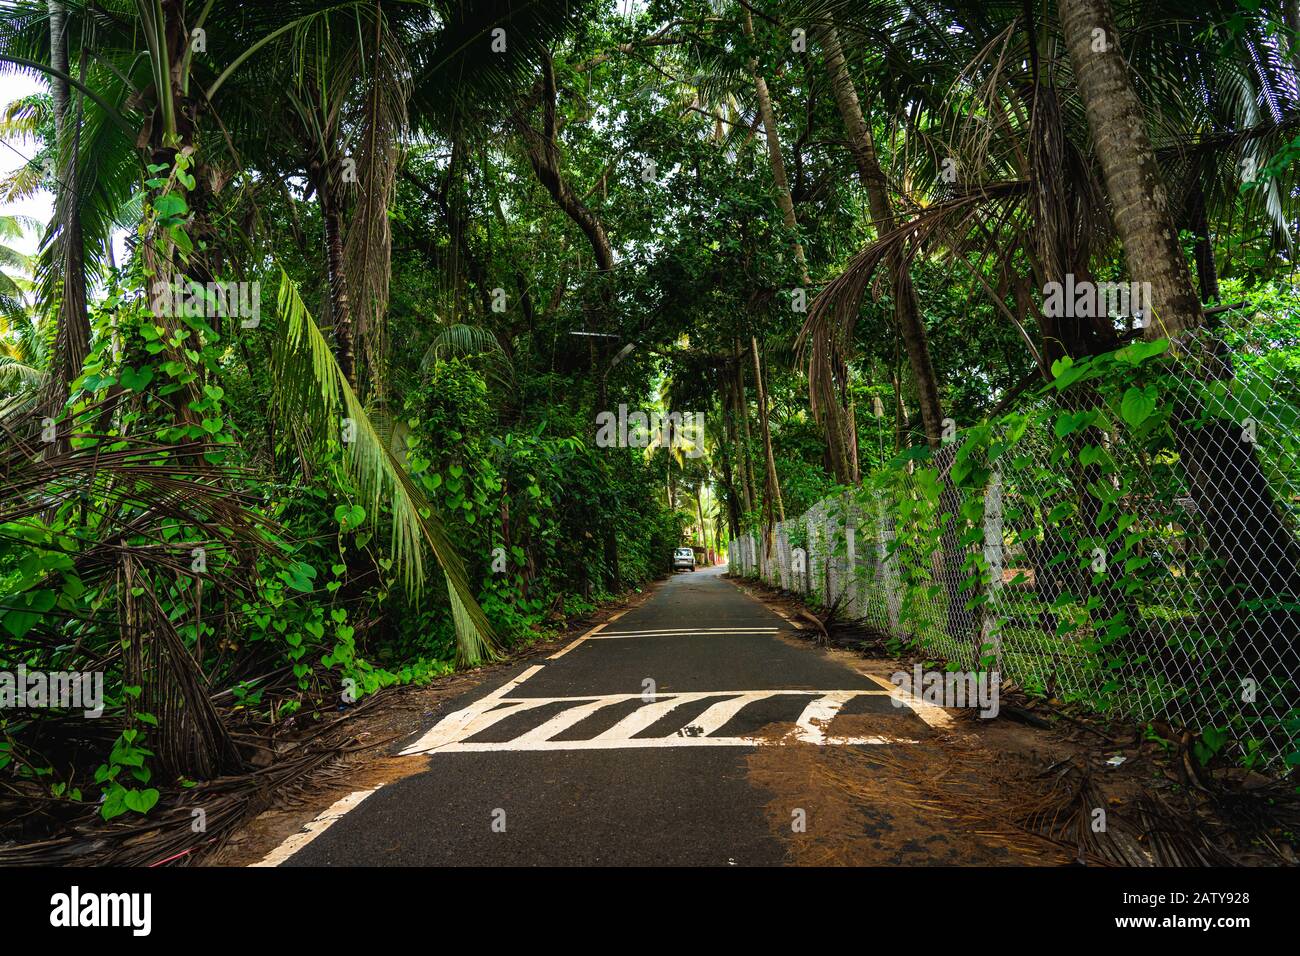 A lonely road in the damp green forest Stock Photo